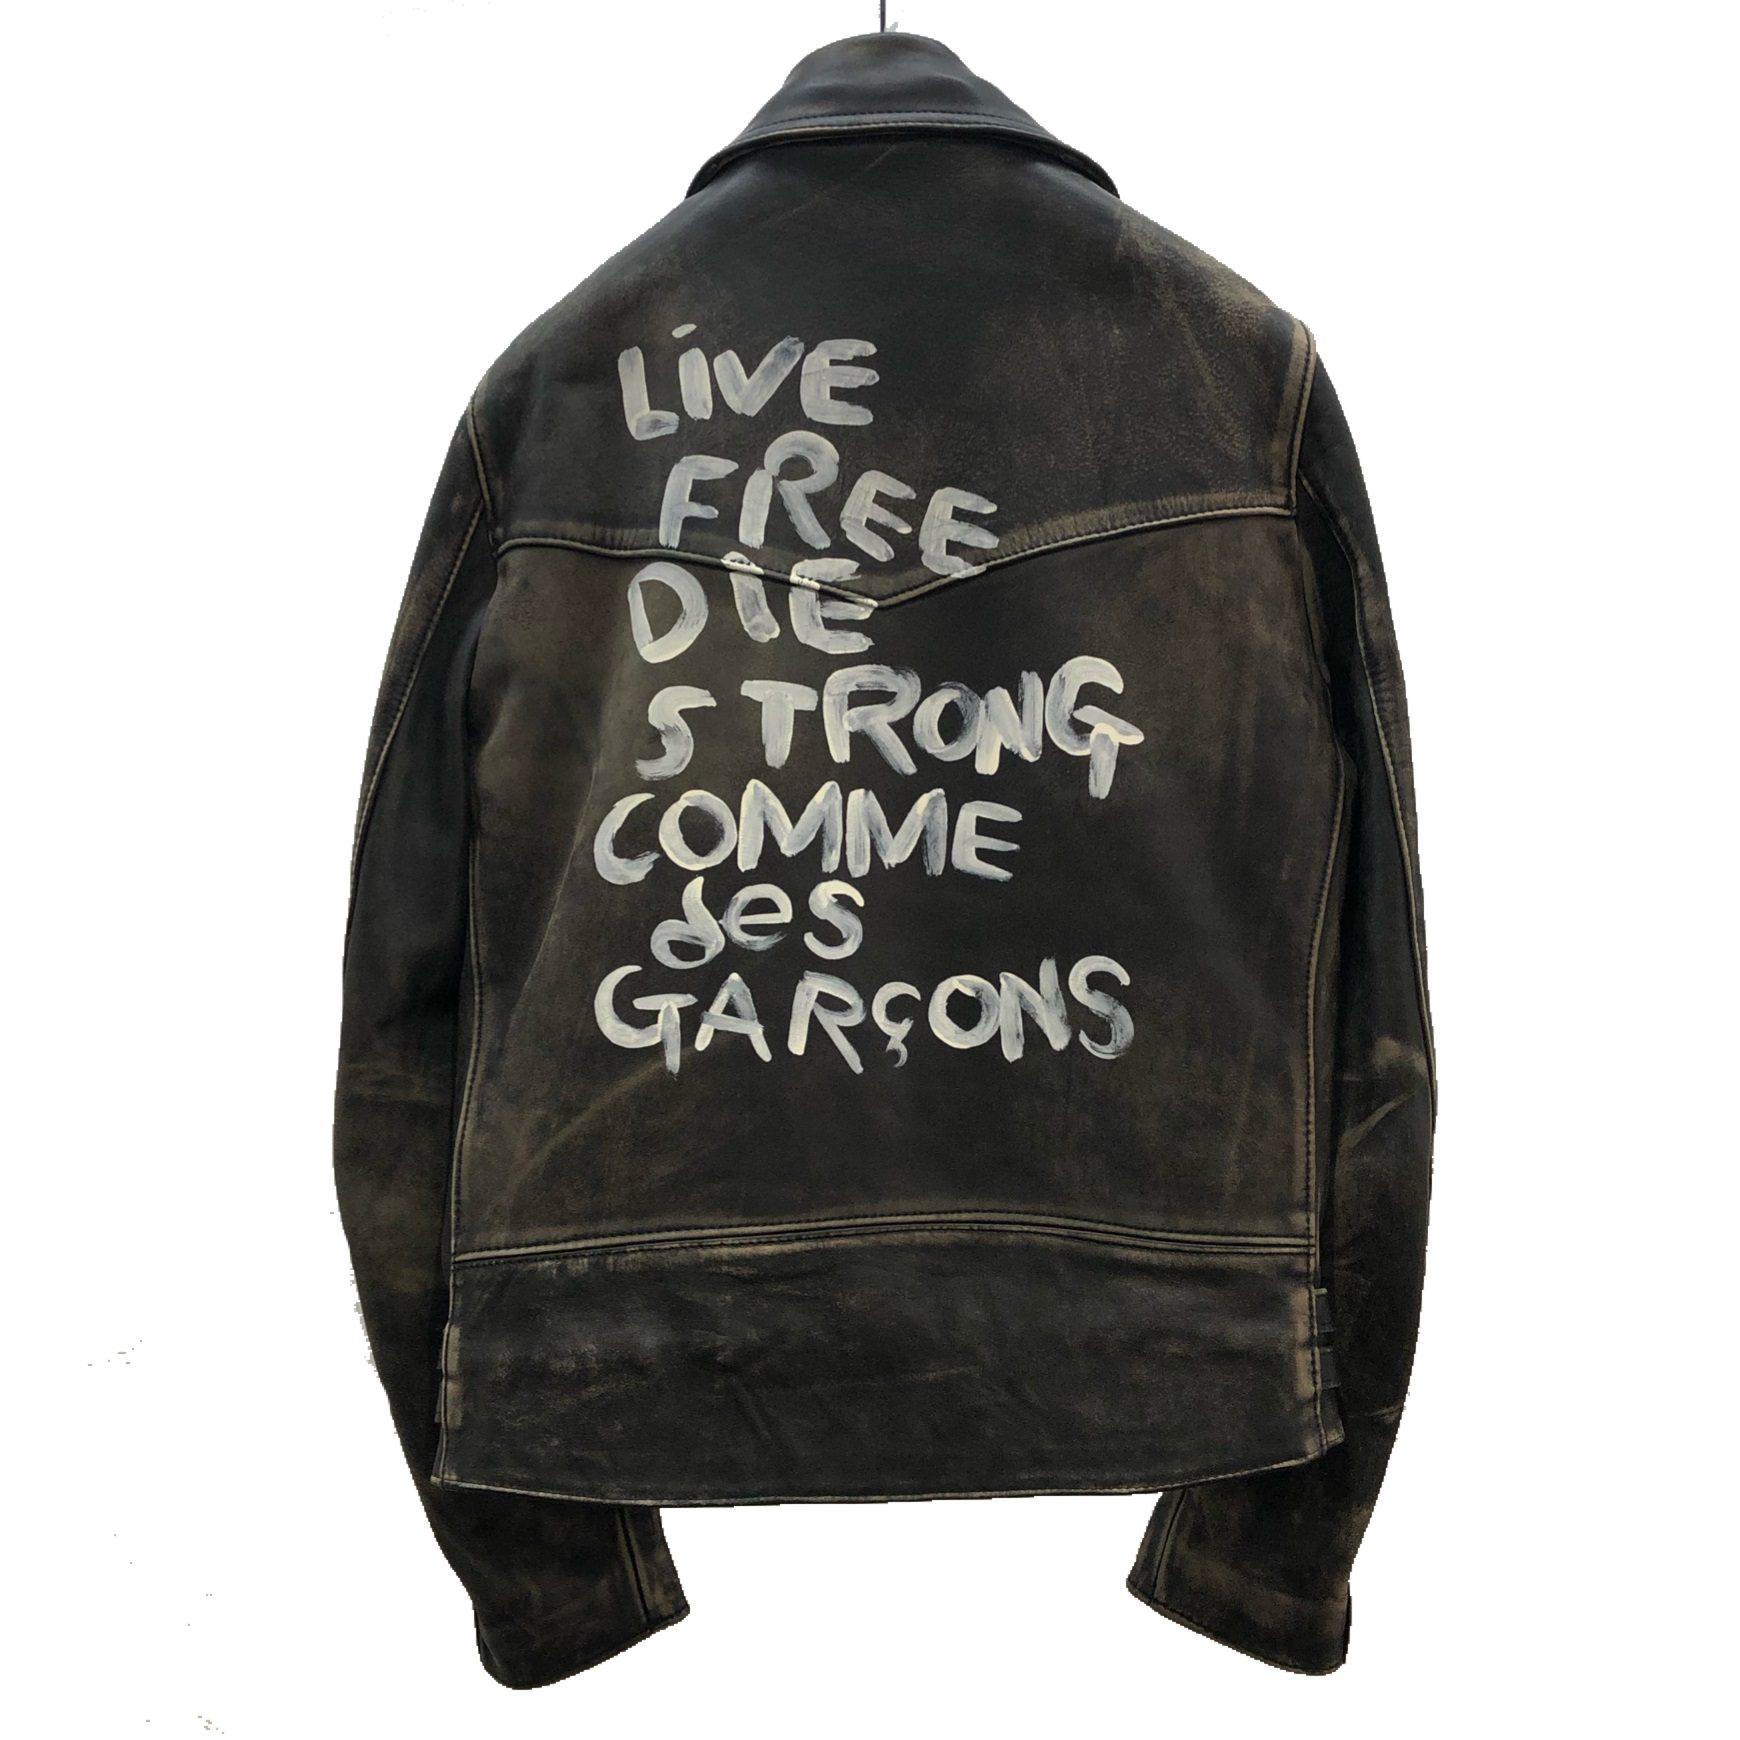 COMME des GARCONS×Lewis Leathers コムデギャルソン×ルイスレザー